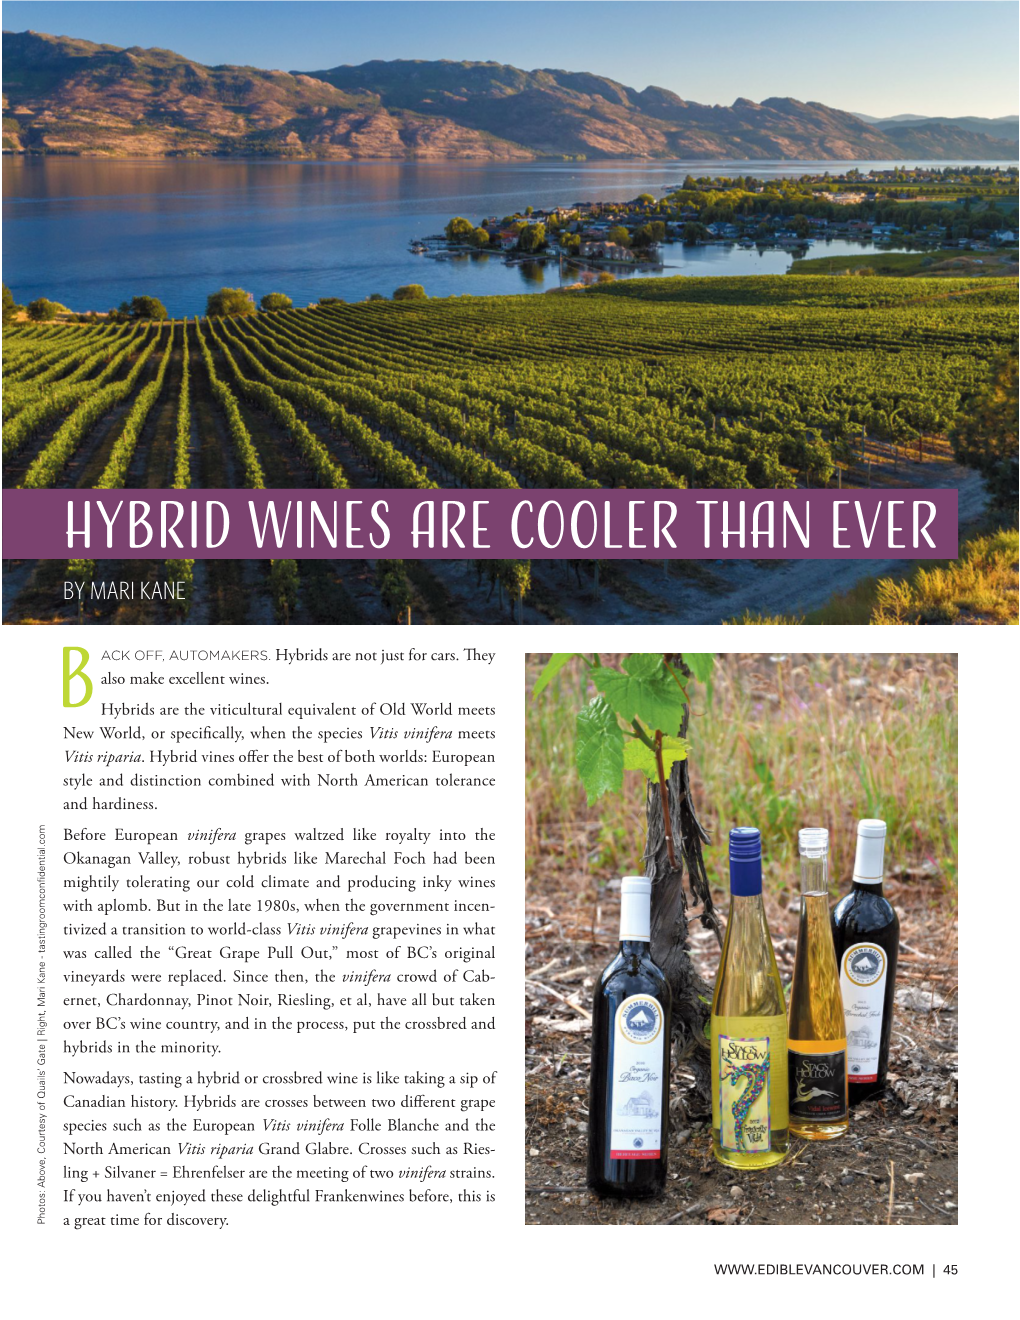 Hybrid Wines Are Cooler Than Ever by MARI KANE